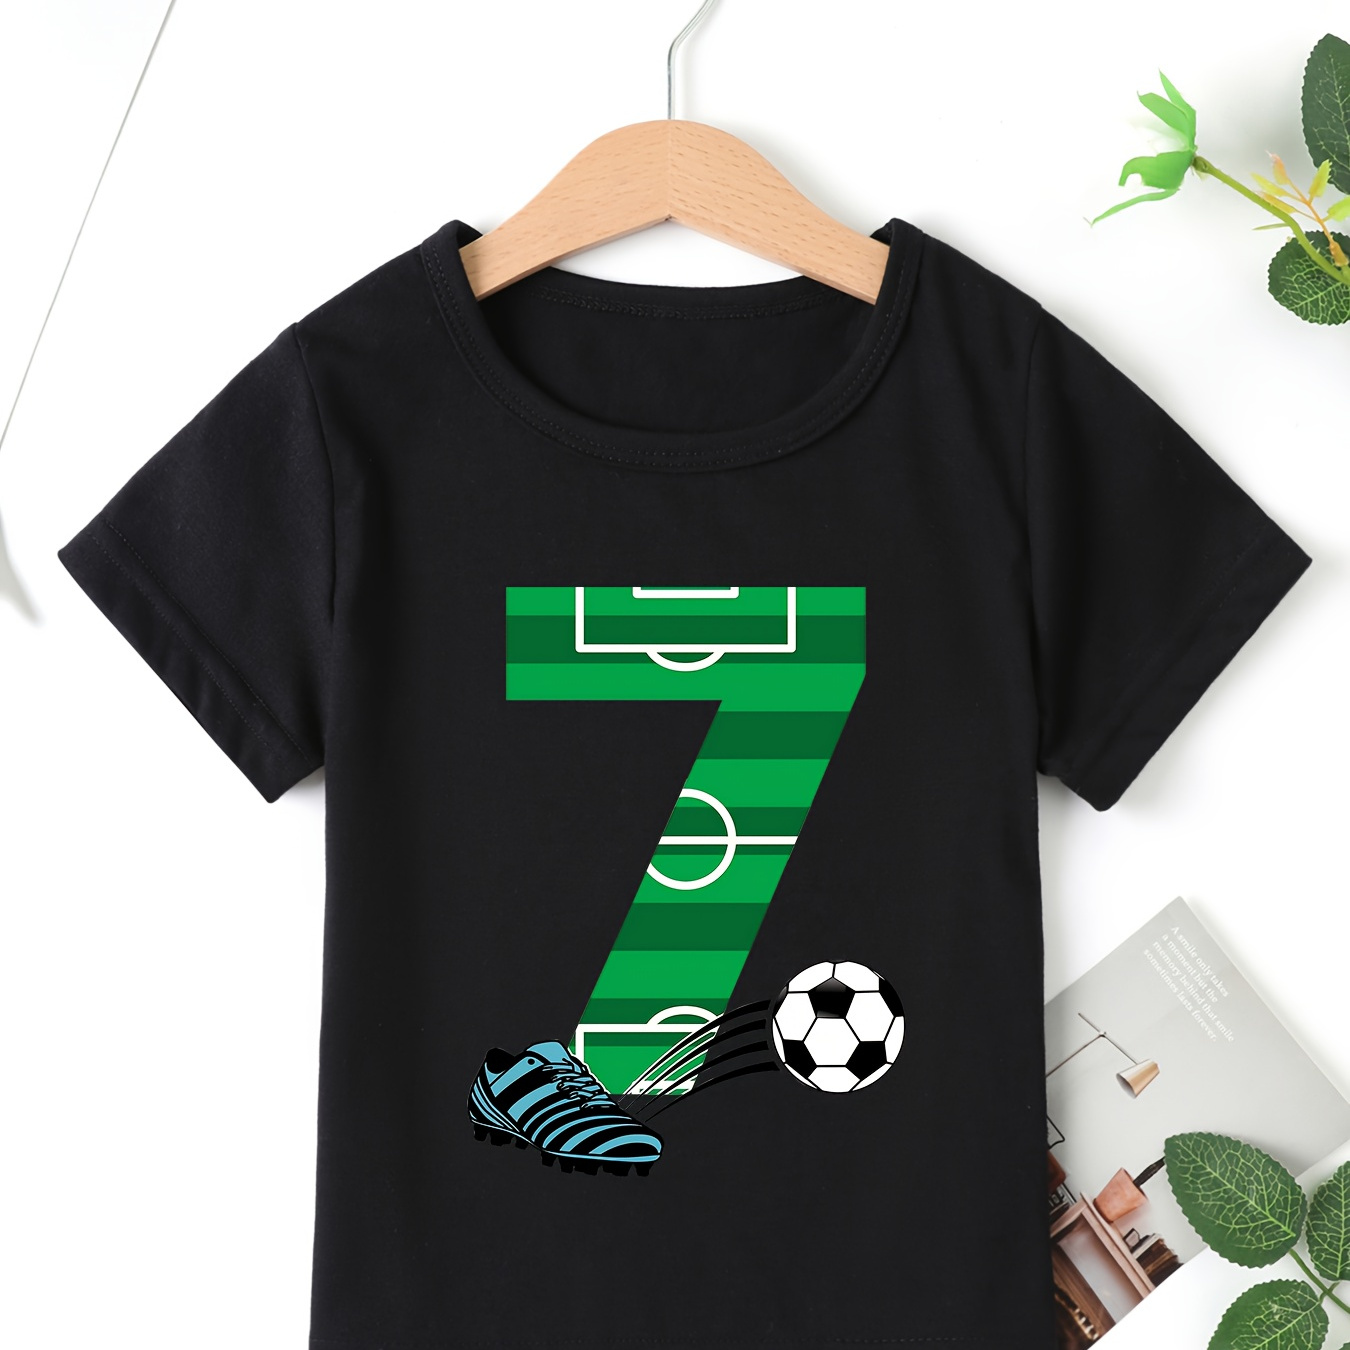 

Cute Number 7 & Soccer Print Casual Short Sleeve T-shirt For Boys, Cool Comfy Lightweight Versatile Tee Top, Boys Summer Outfits Clothes